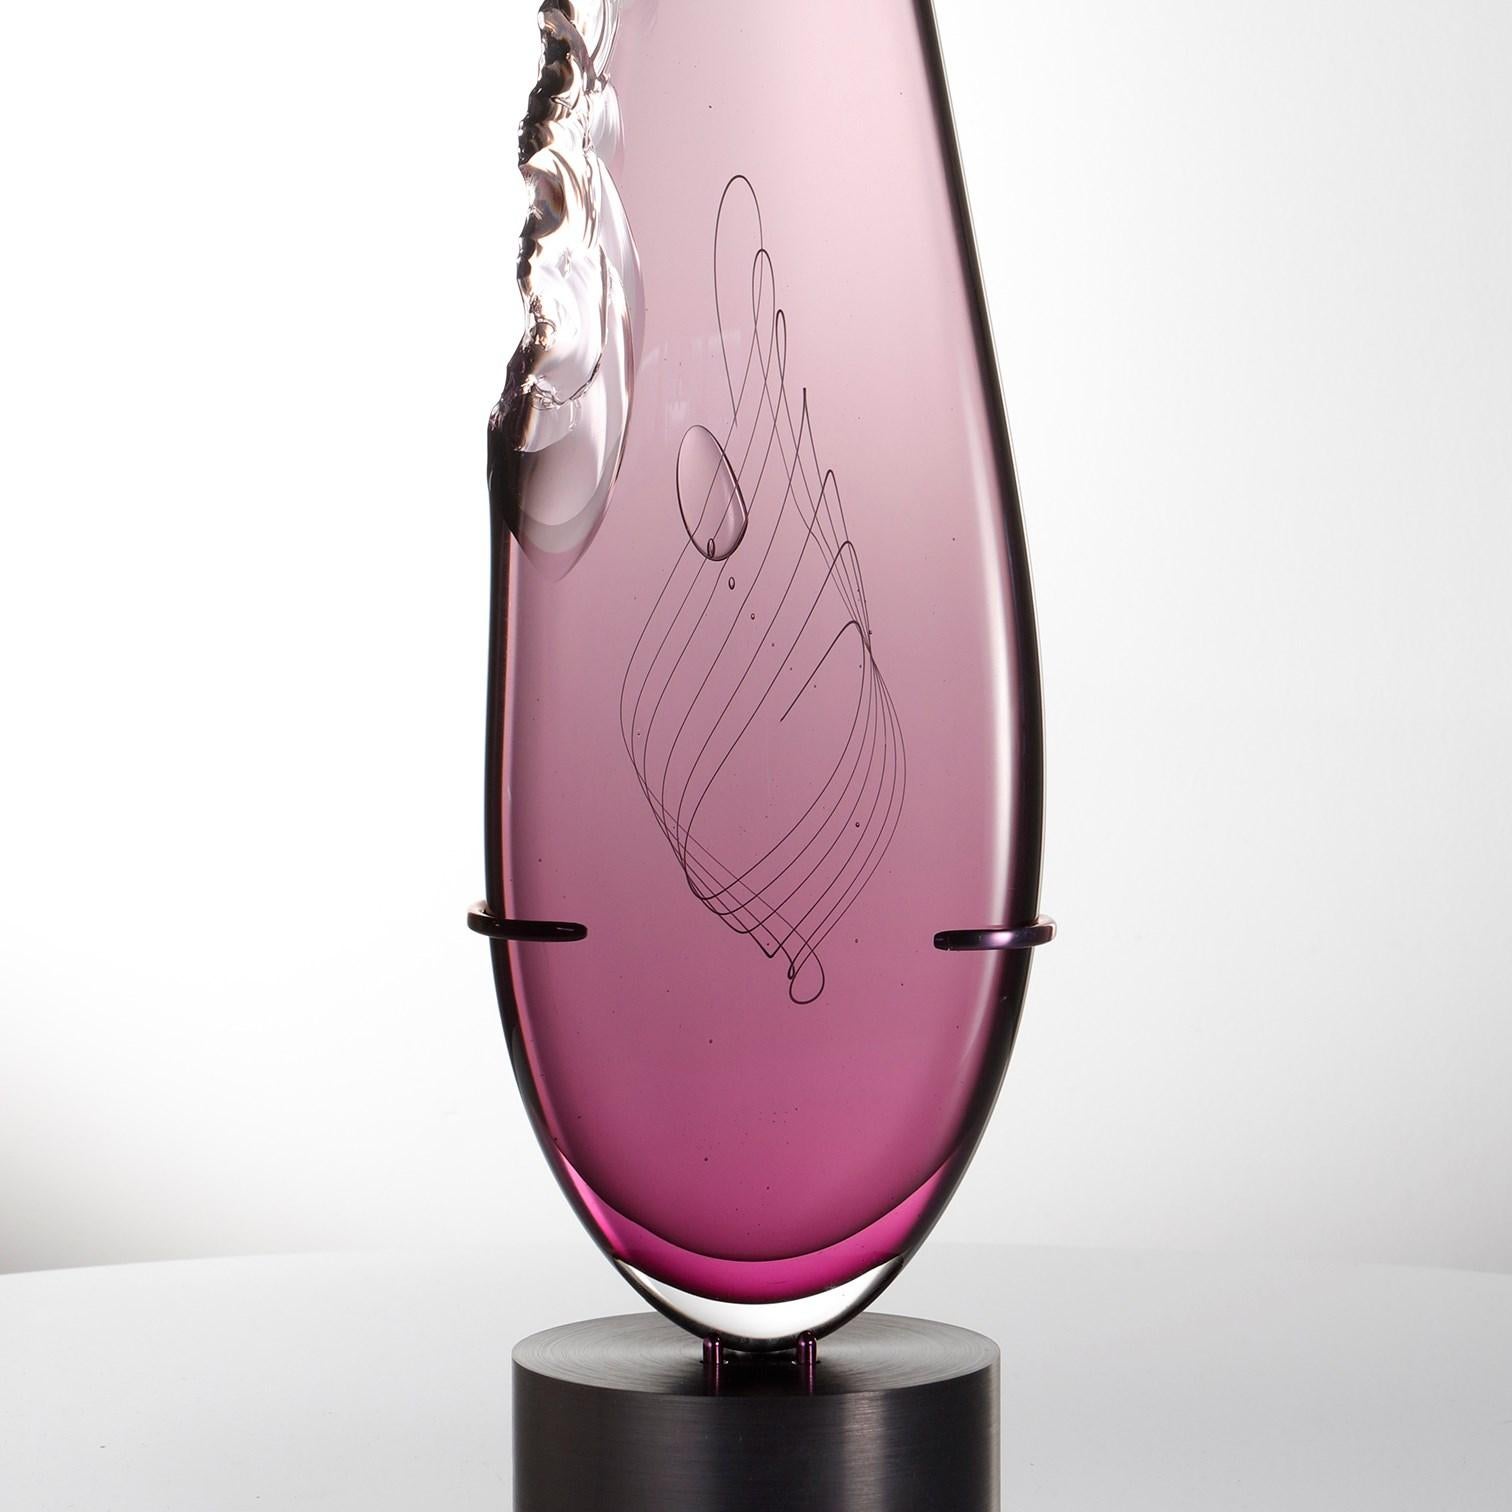 Organic Modern Clovis in Amethyst, a Unique Tall Abstract Glass Sculpture by James Devereux For Sale